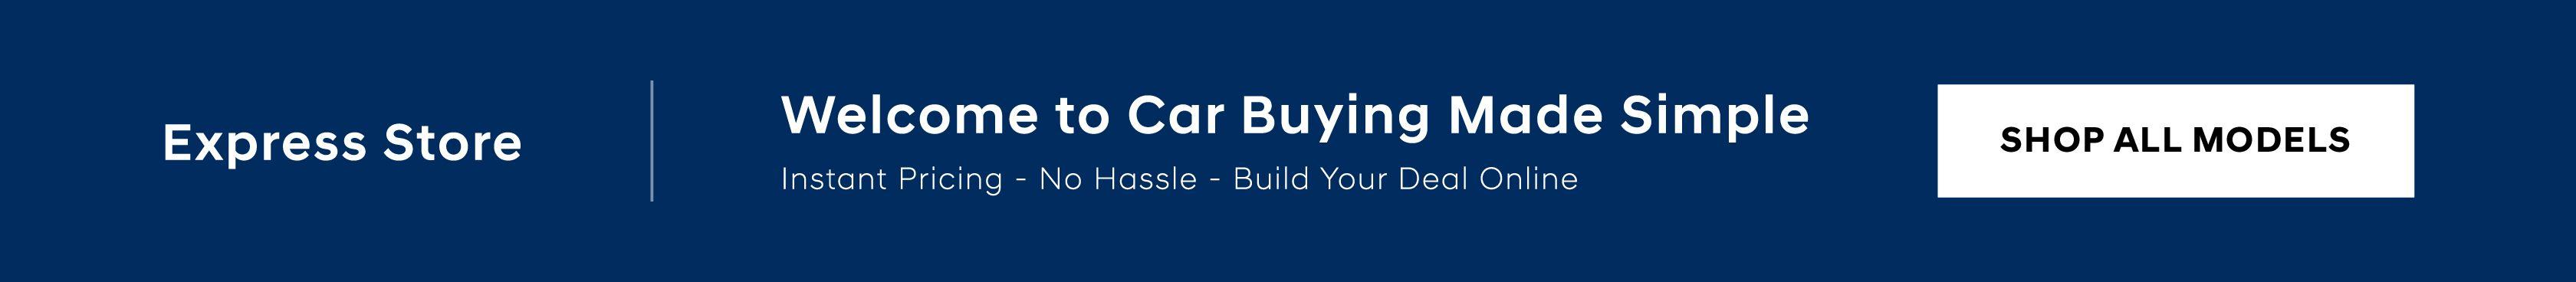 Welcome to Car Buying Made Simple Instant Pricing - No Hassle - Build Your Deal Online